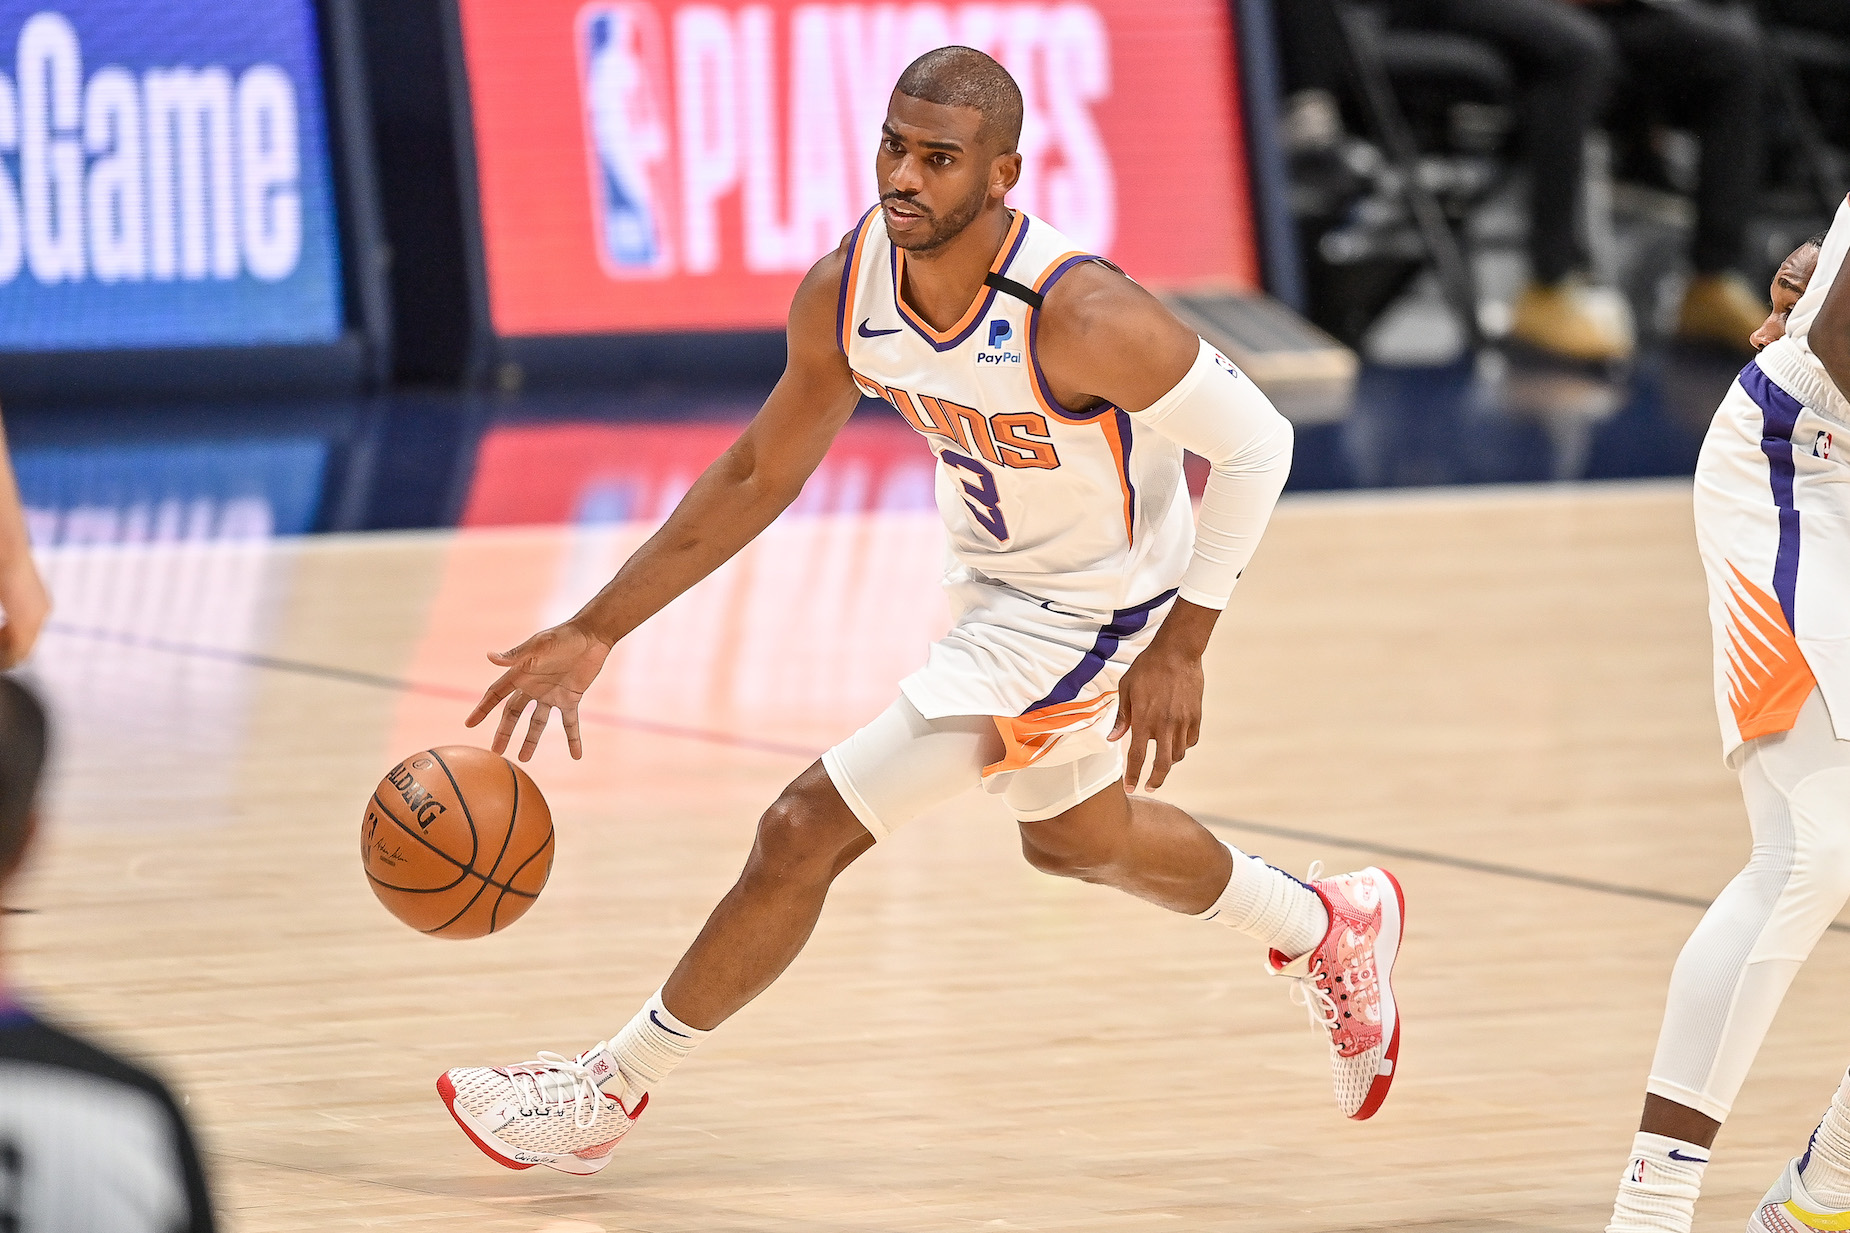 Chris Paul Is Worth $130 Million But Doesn’t Like to Spend His Money on Physical Things: ‘Me Now, It’s Experiences’